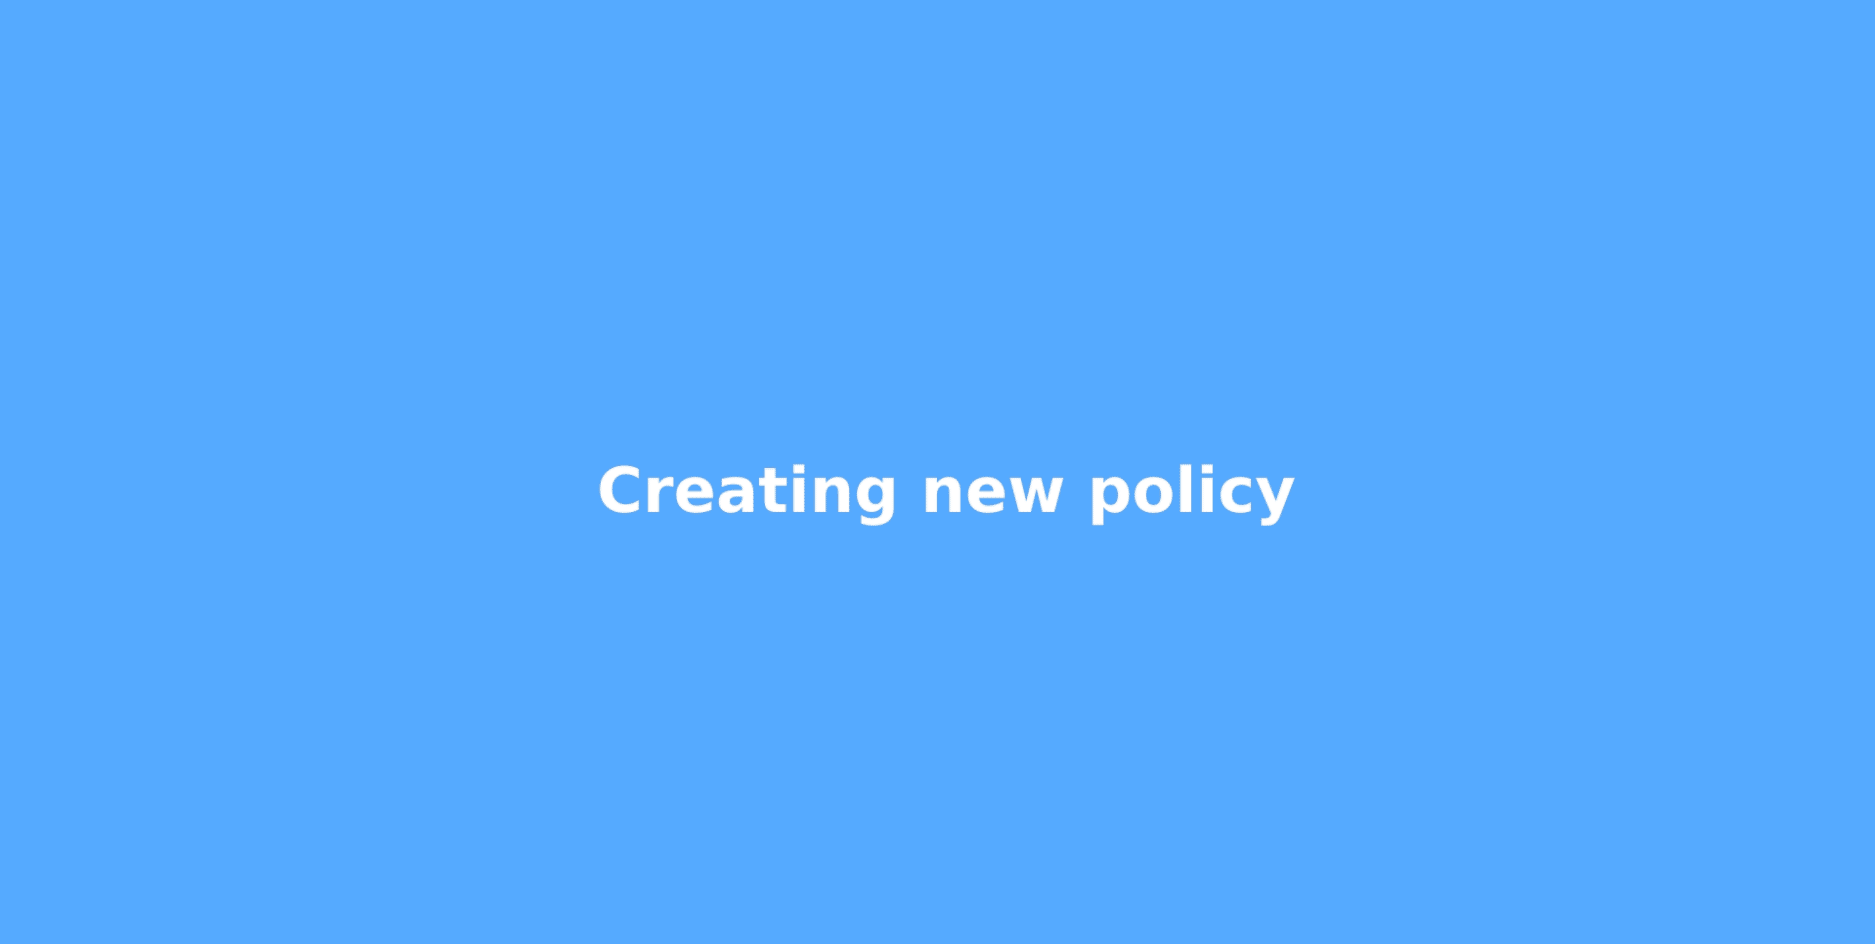 animation showing how to create a new policy